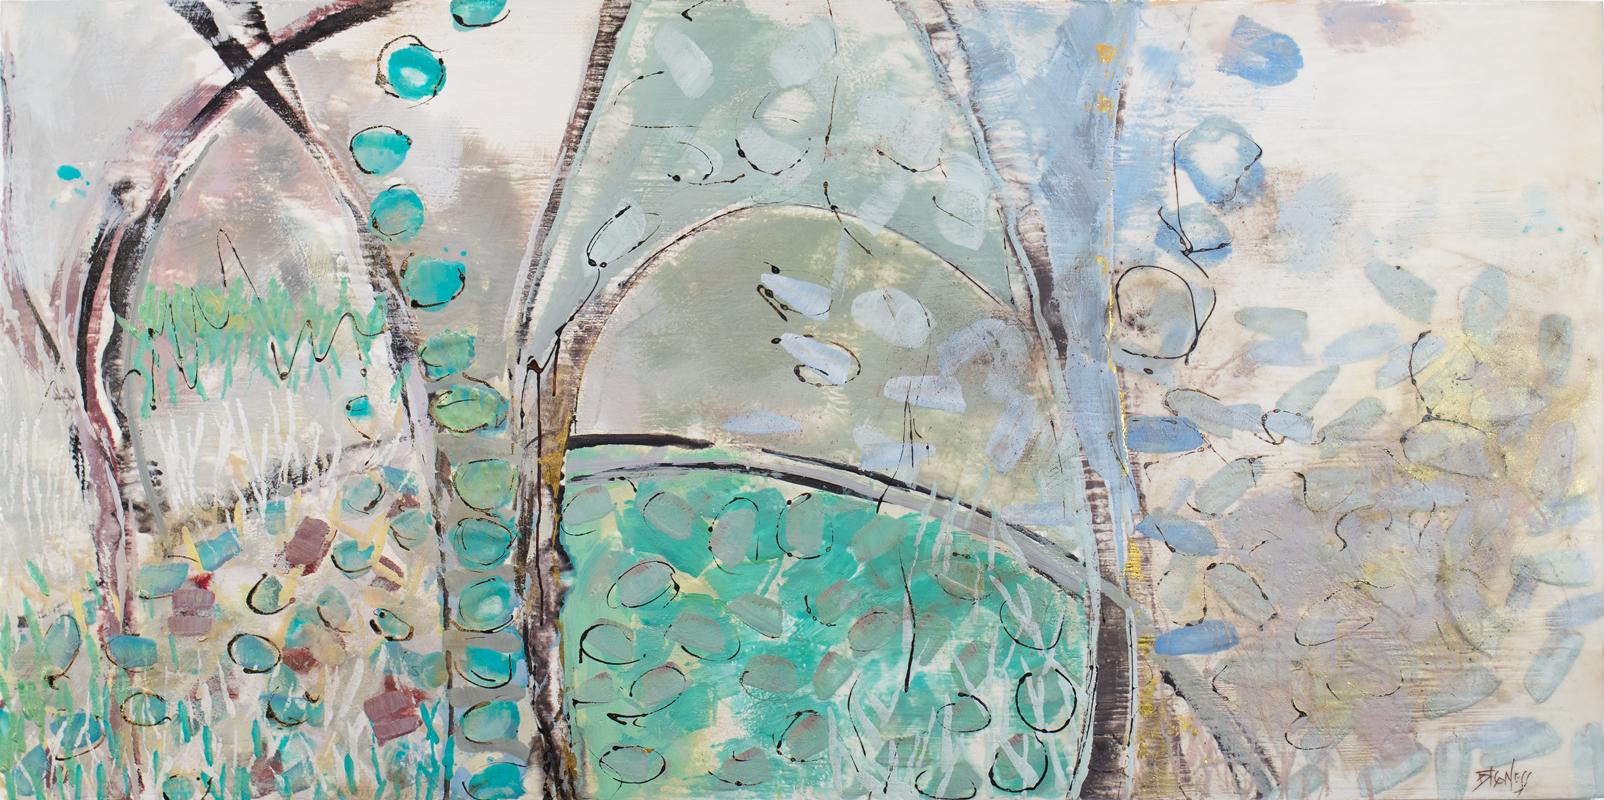 This is an abstract encaustic painting by Linda Bigness. It features a green, blue, and grey multicolored palette with gold leaf accents and neutral sides. Dabs of paint and organic shapes and linework are layered throughout to create a balanced